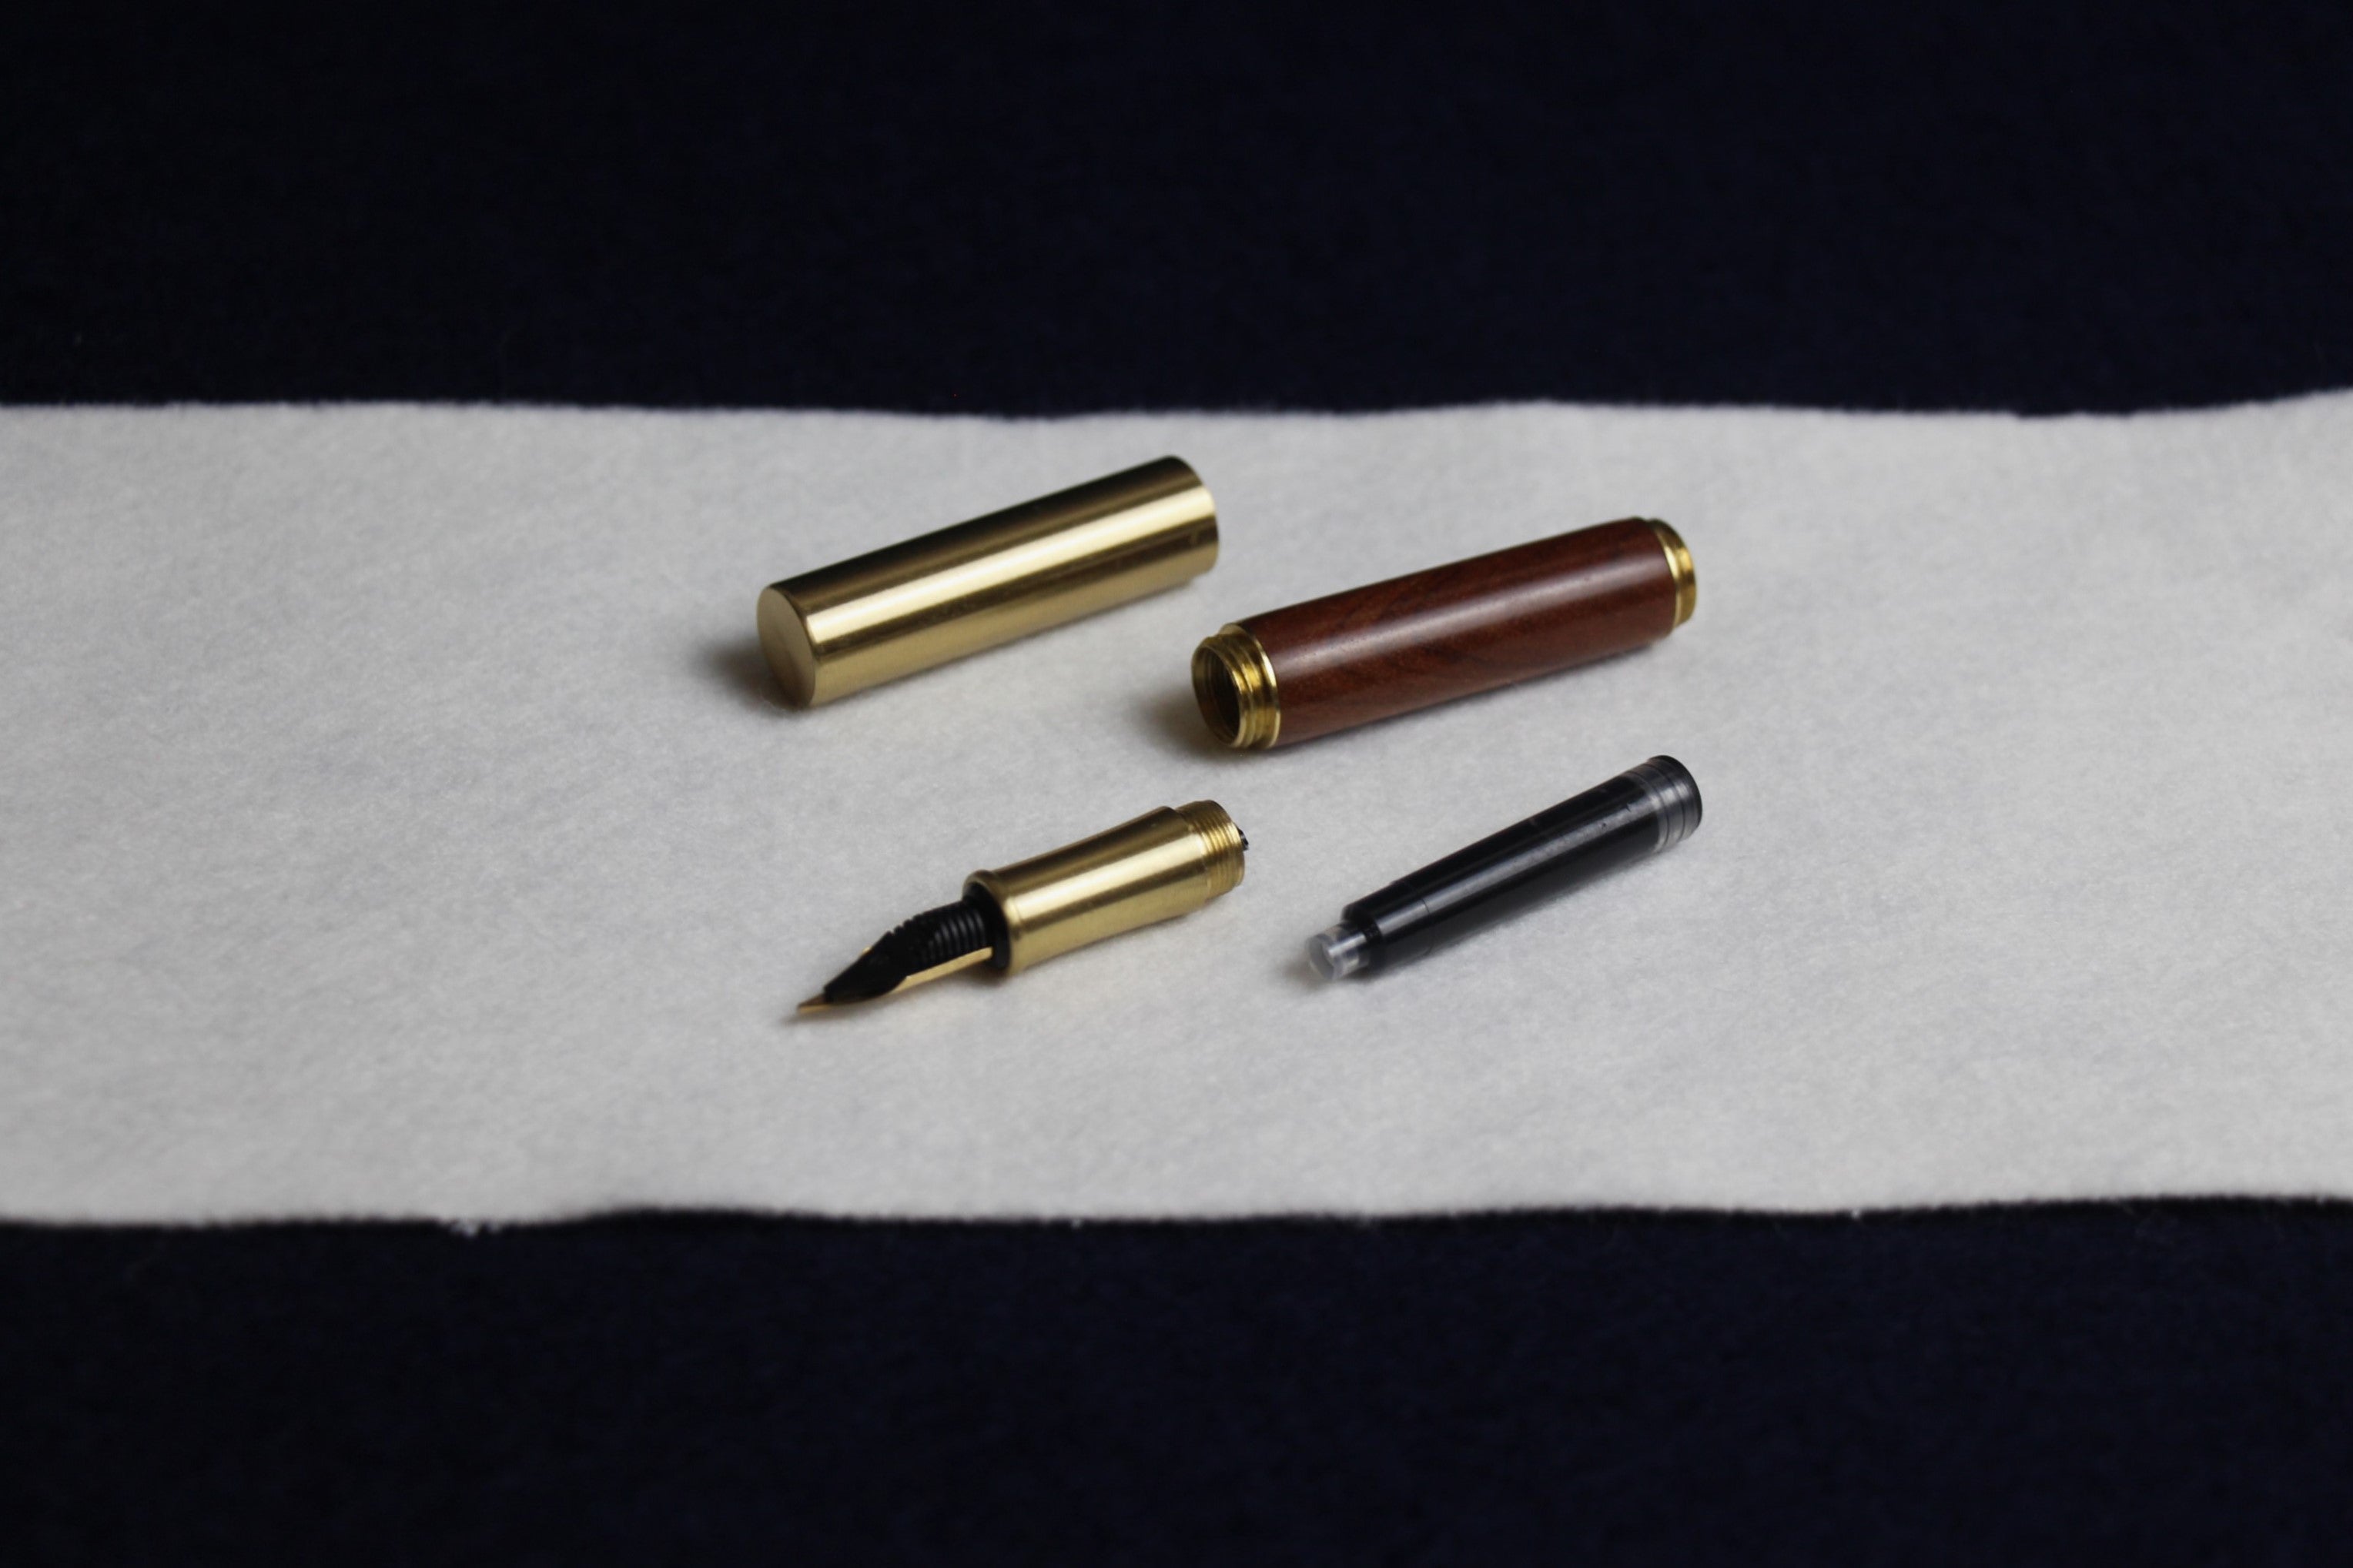 Mini pocket wooden fountain pens for Arabic calligraphy